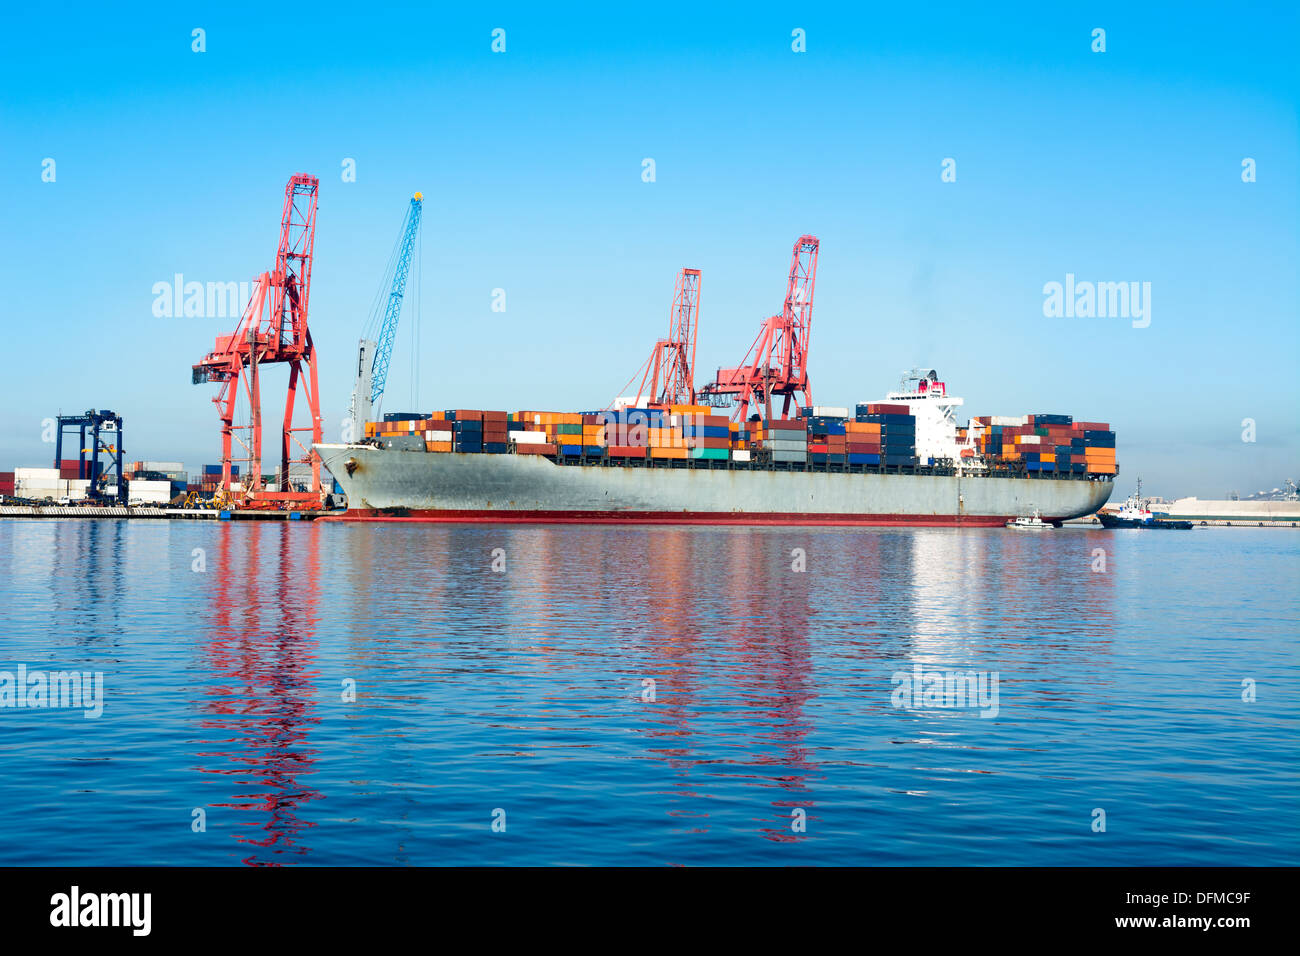 A cargo freighter with colorful cargo containers being loaded for international transportation Stock Photo